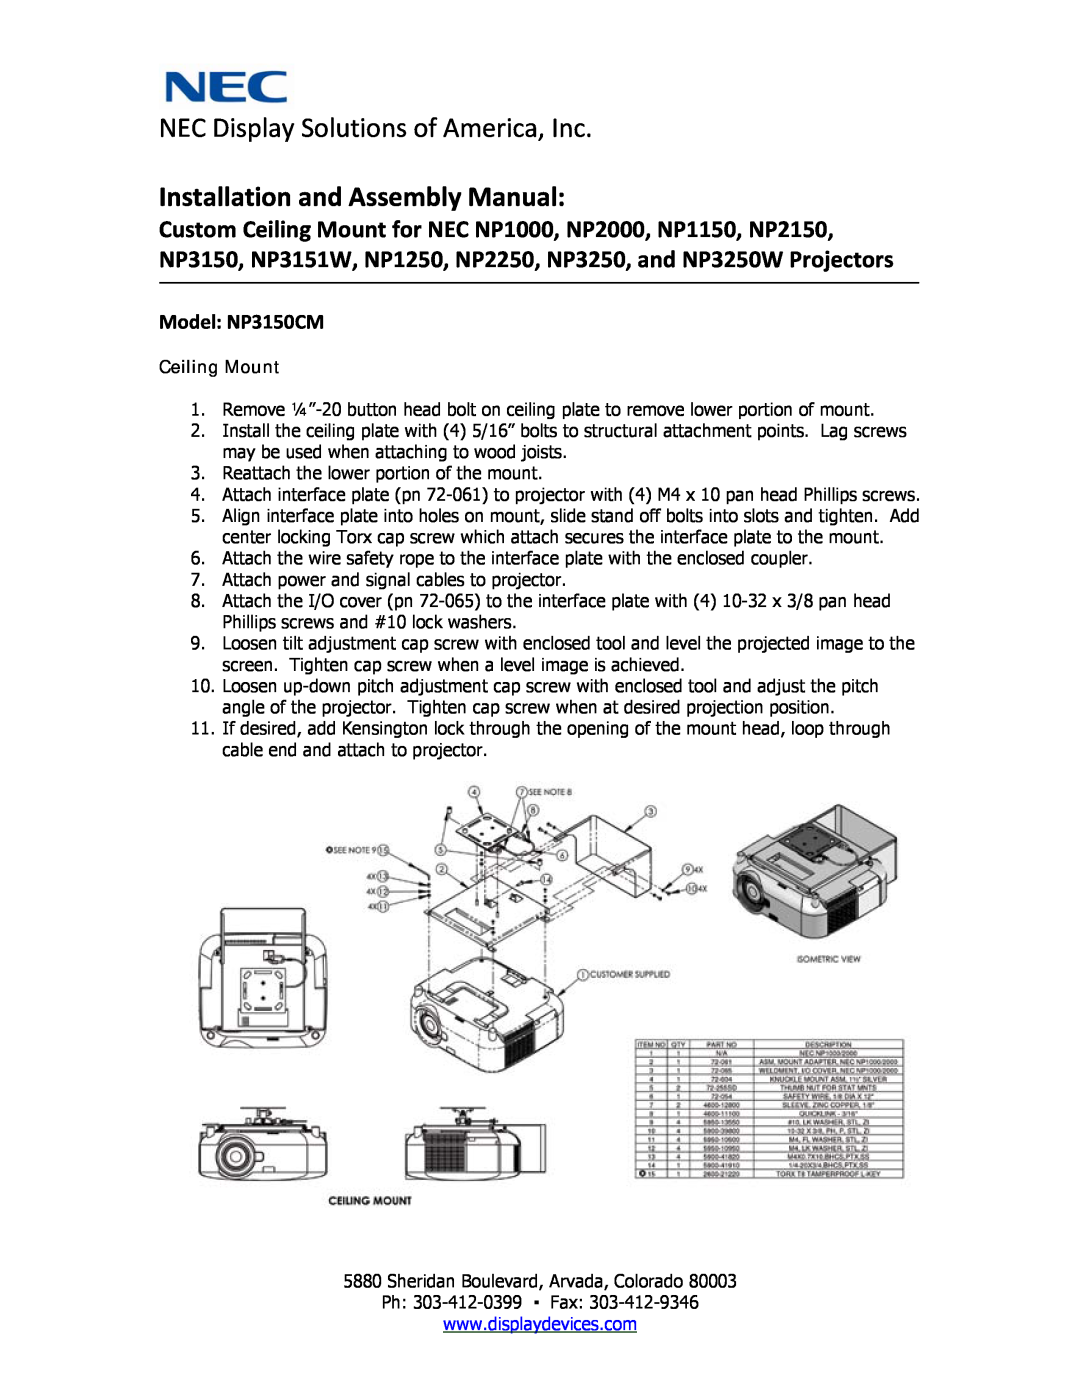 NEC manual Ceiling Mount, NEC Display Solutions of America, Inc, Installation and Assembly Manual, Model NP3150CM 